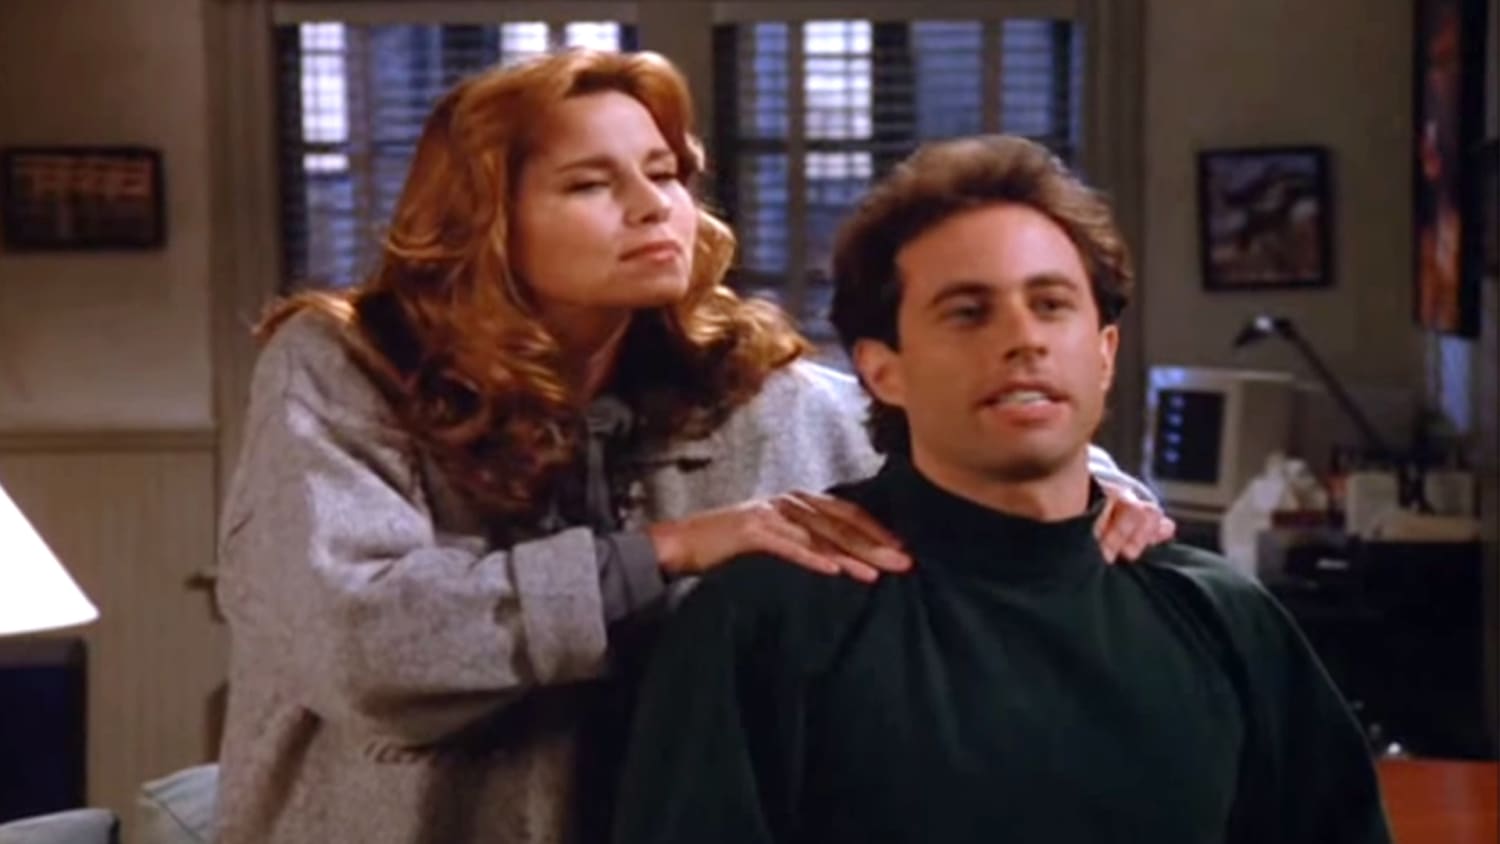 An Abridged Oral History of Jerry's Girlfriends on Seinfeld